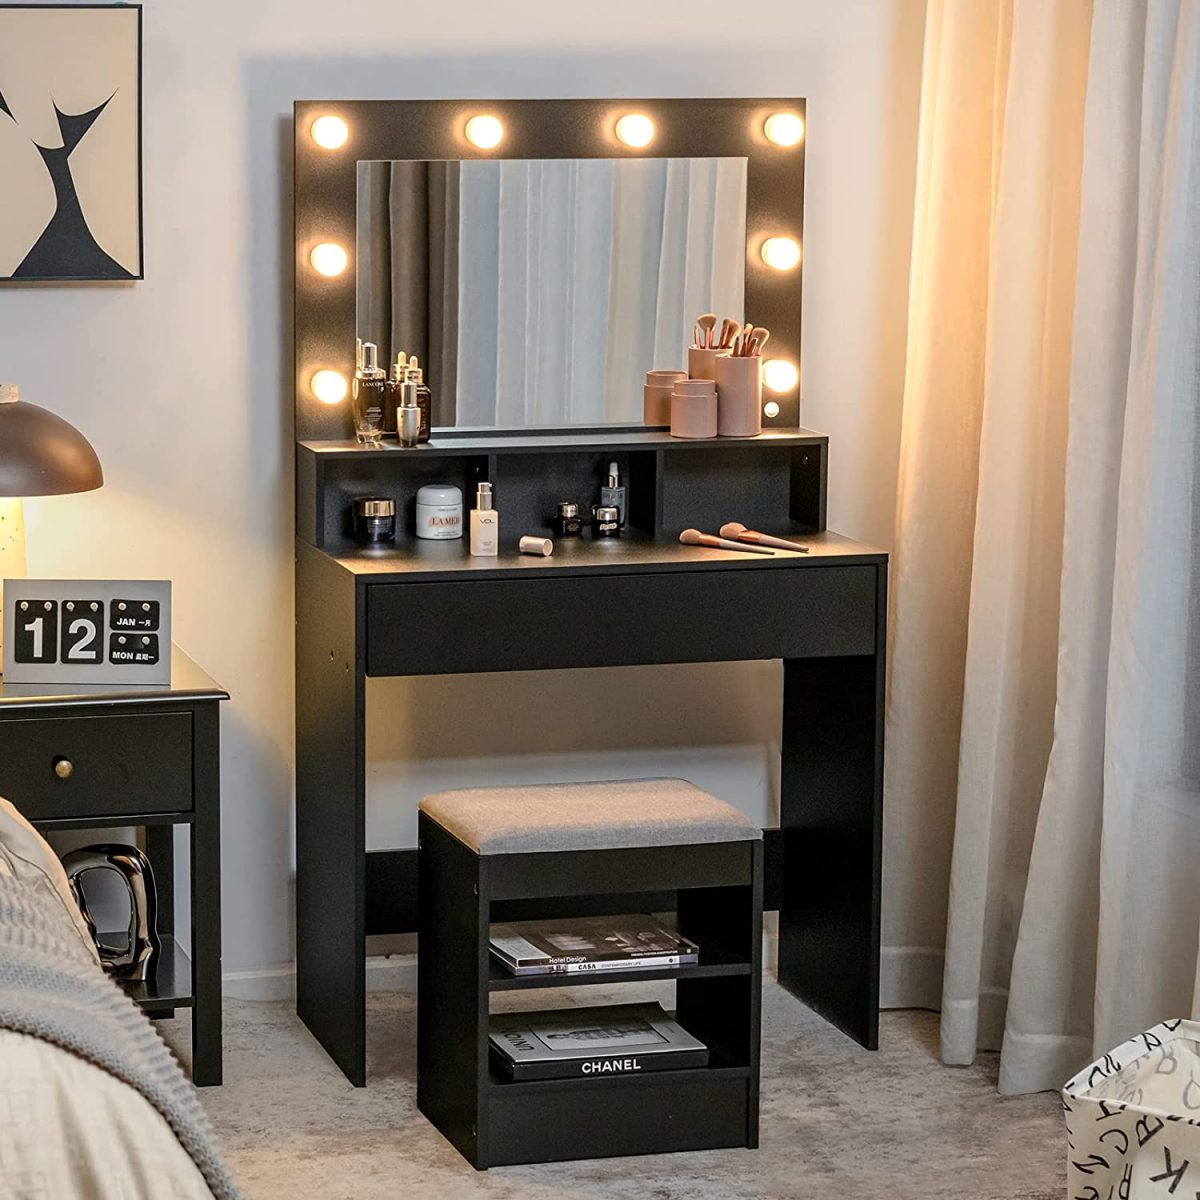 11 Luxurious Dressing Table Ideas for Small Bedrooms!